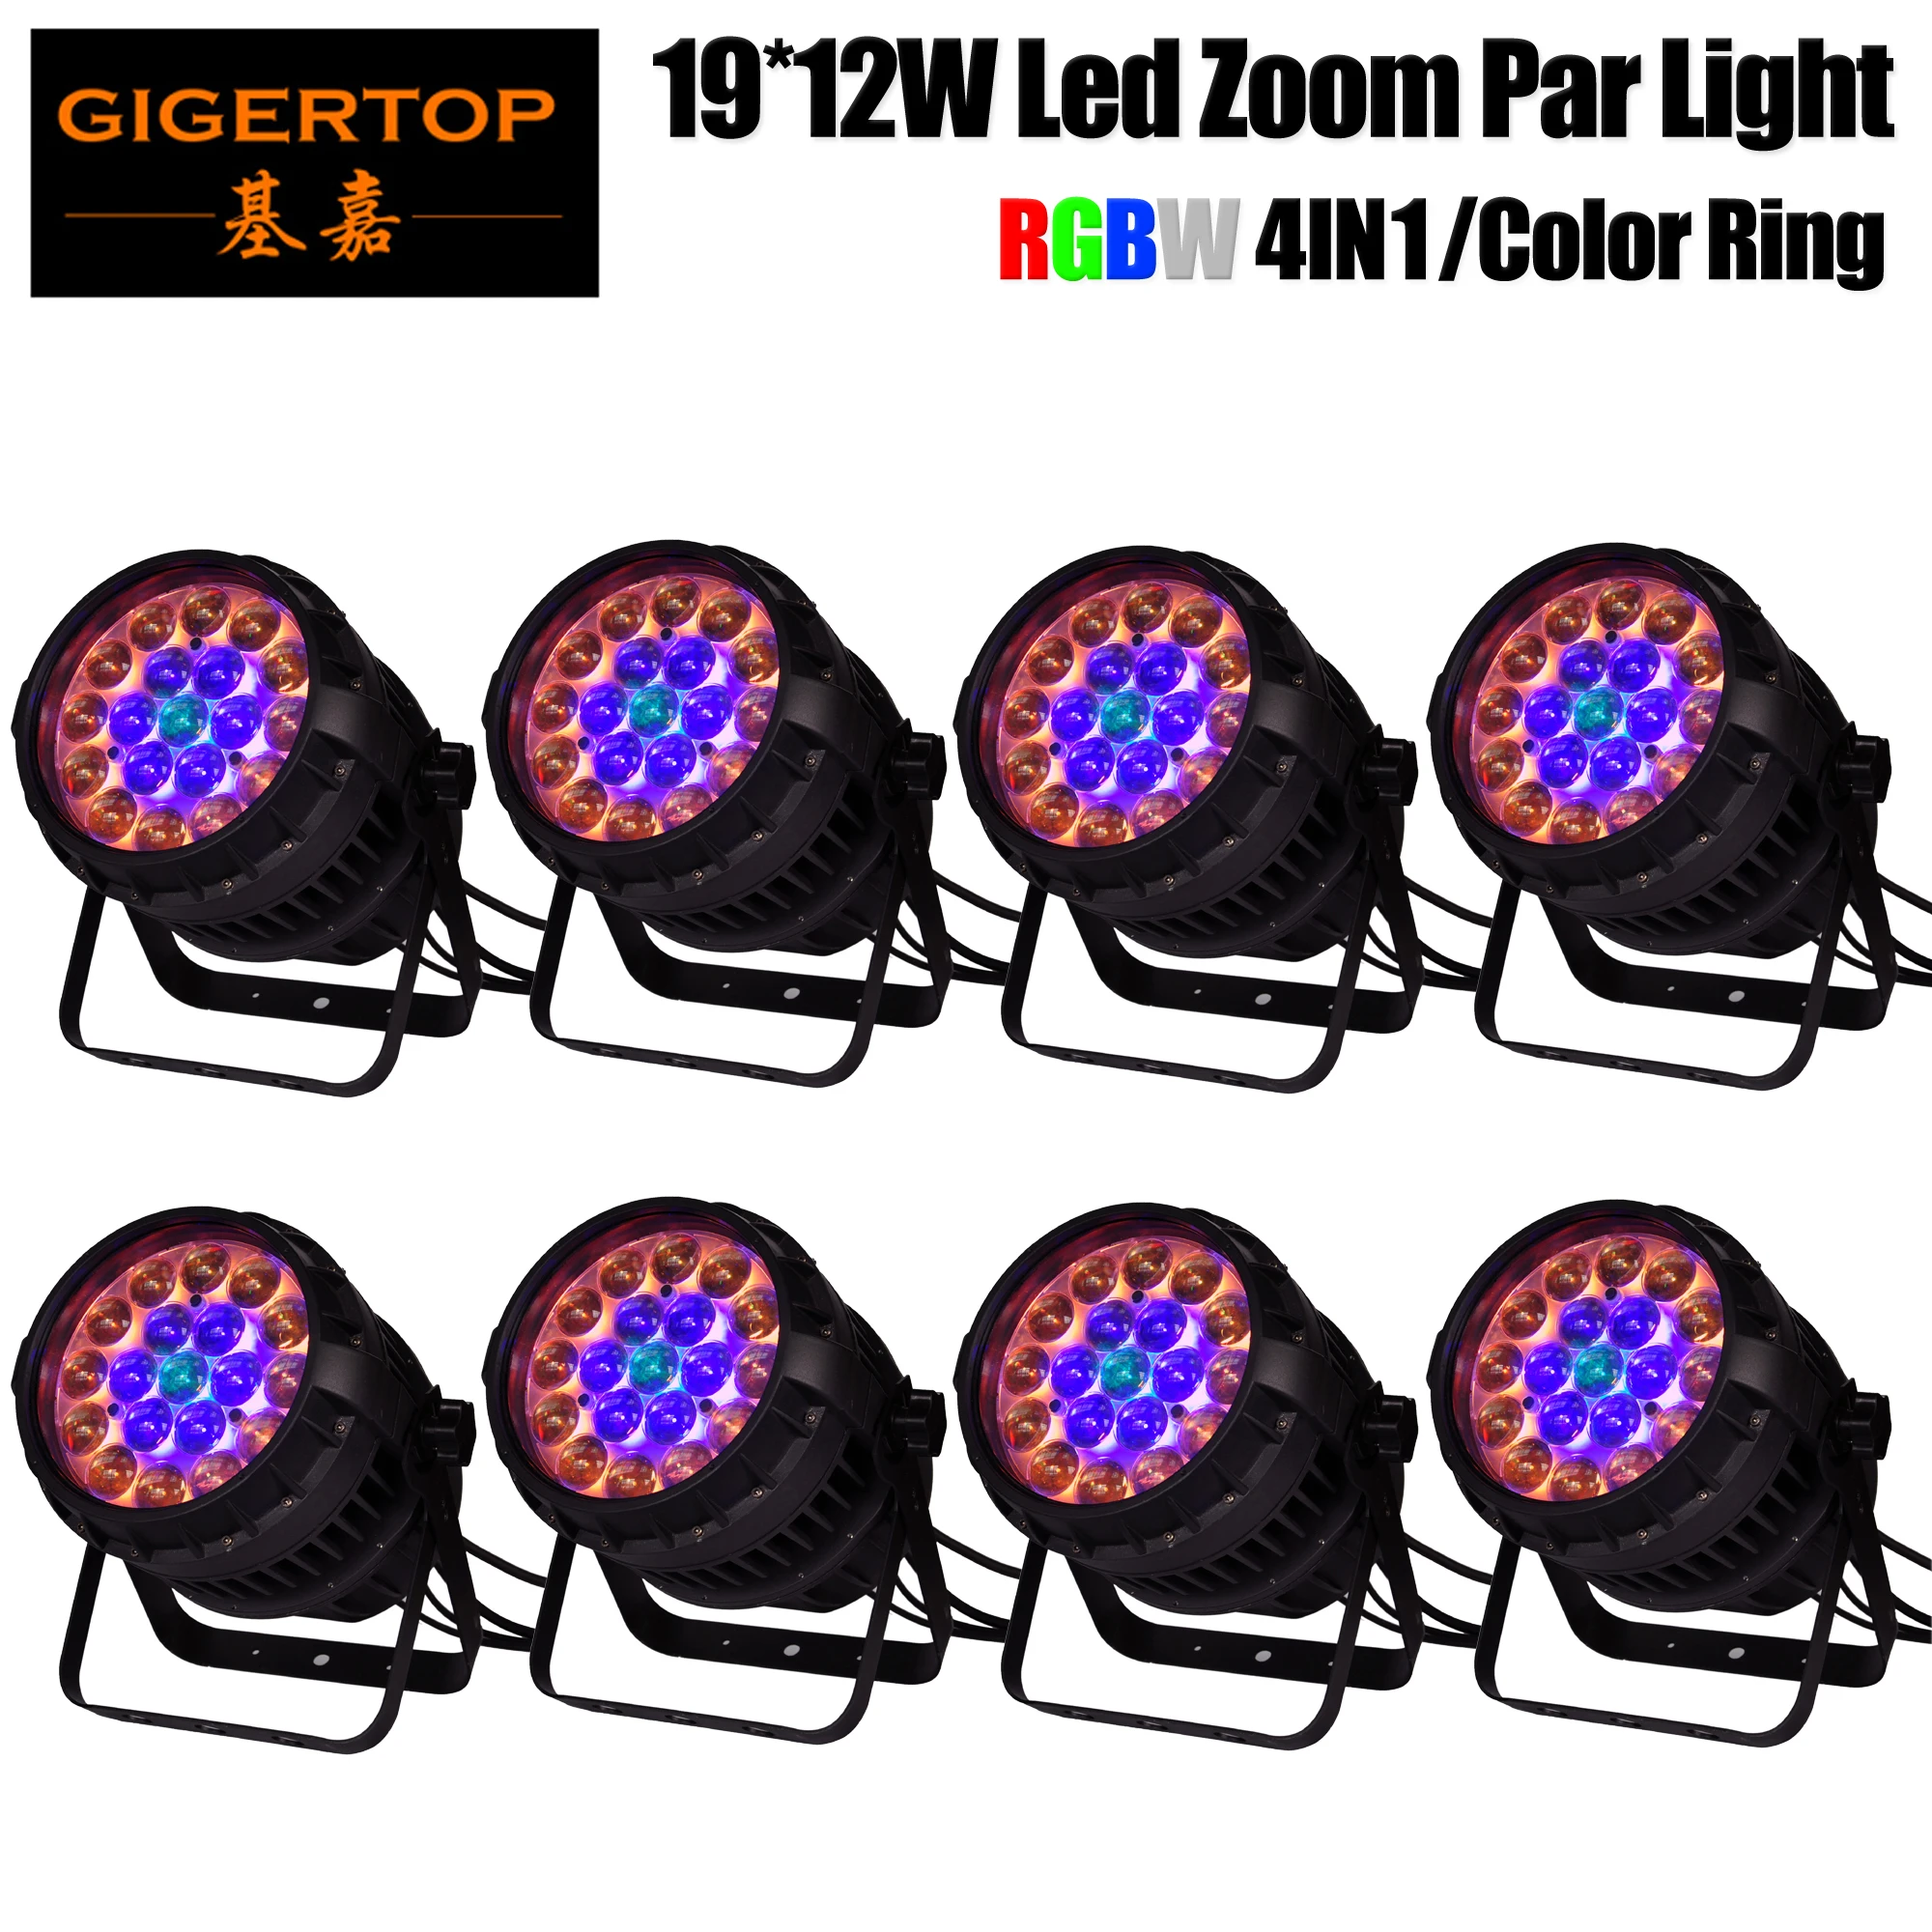 

Gigertop TP-P83 8 Pack 230W High Power Zoom Led Waterproof Par Cans IP65 Strong Handle Color Individual Control Ring 6/10/18 DMX